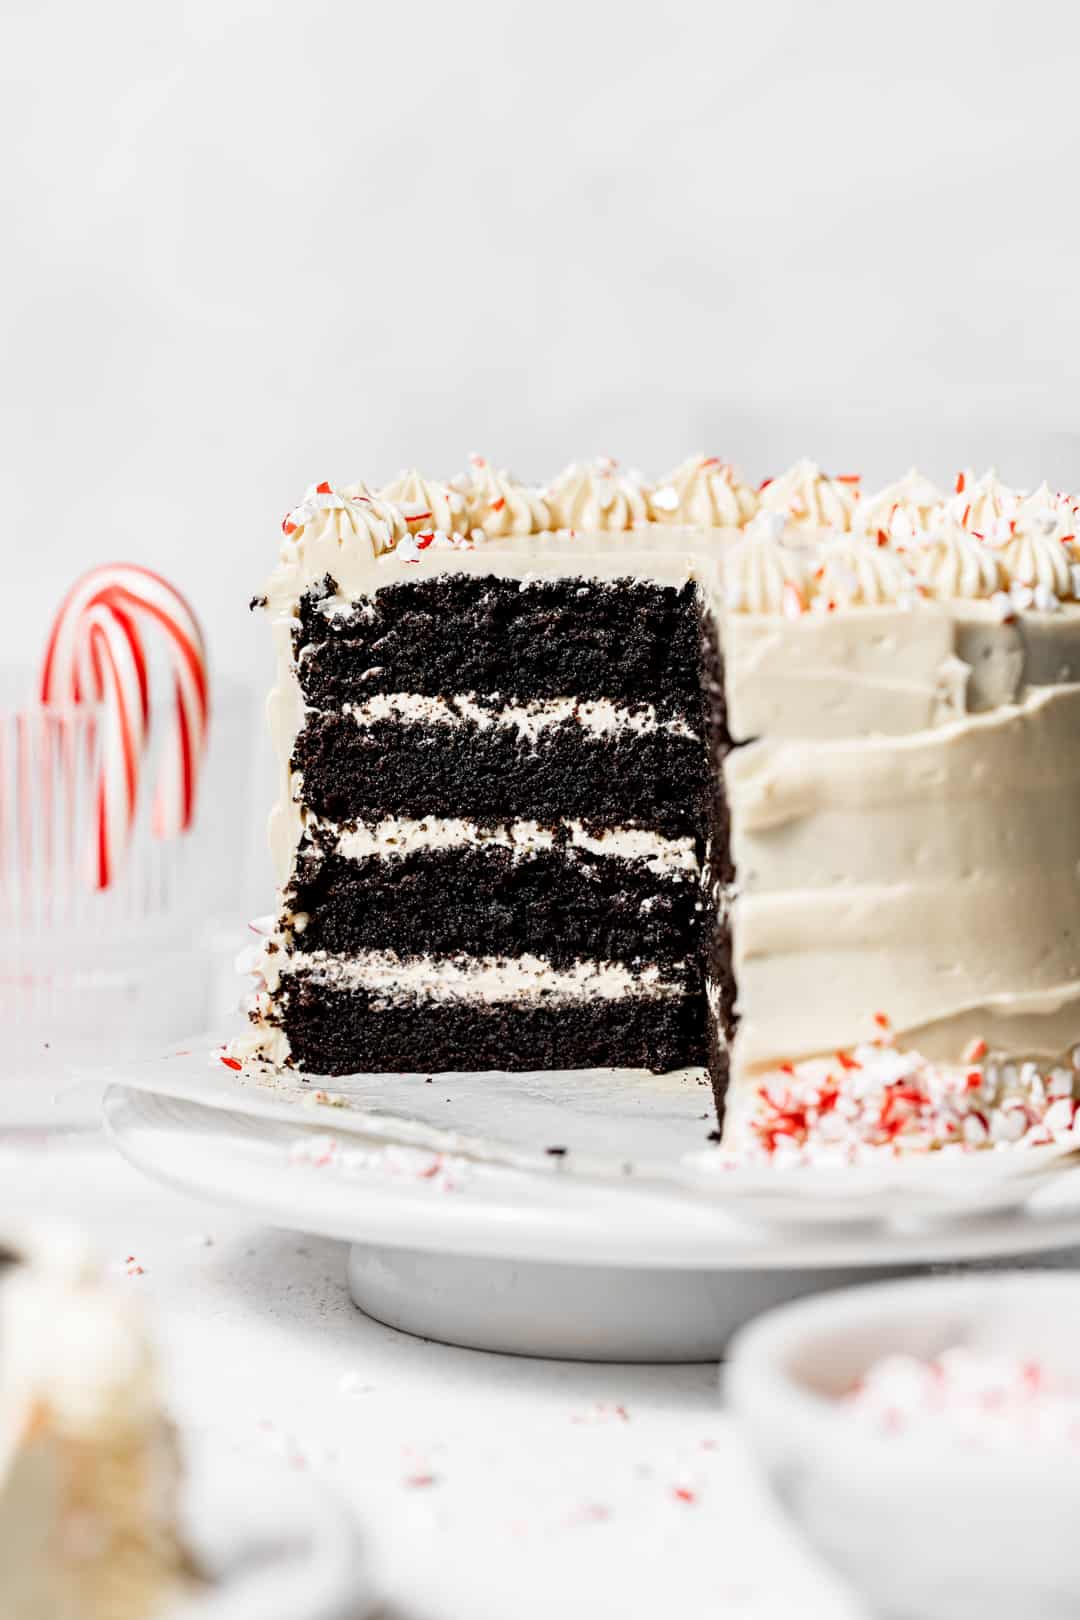 chocolate peppermint cake on white cake stand with slice taken out showing layers.